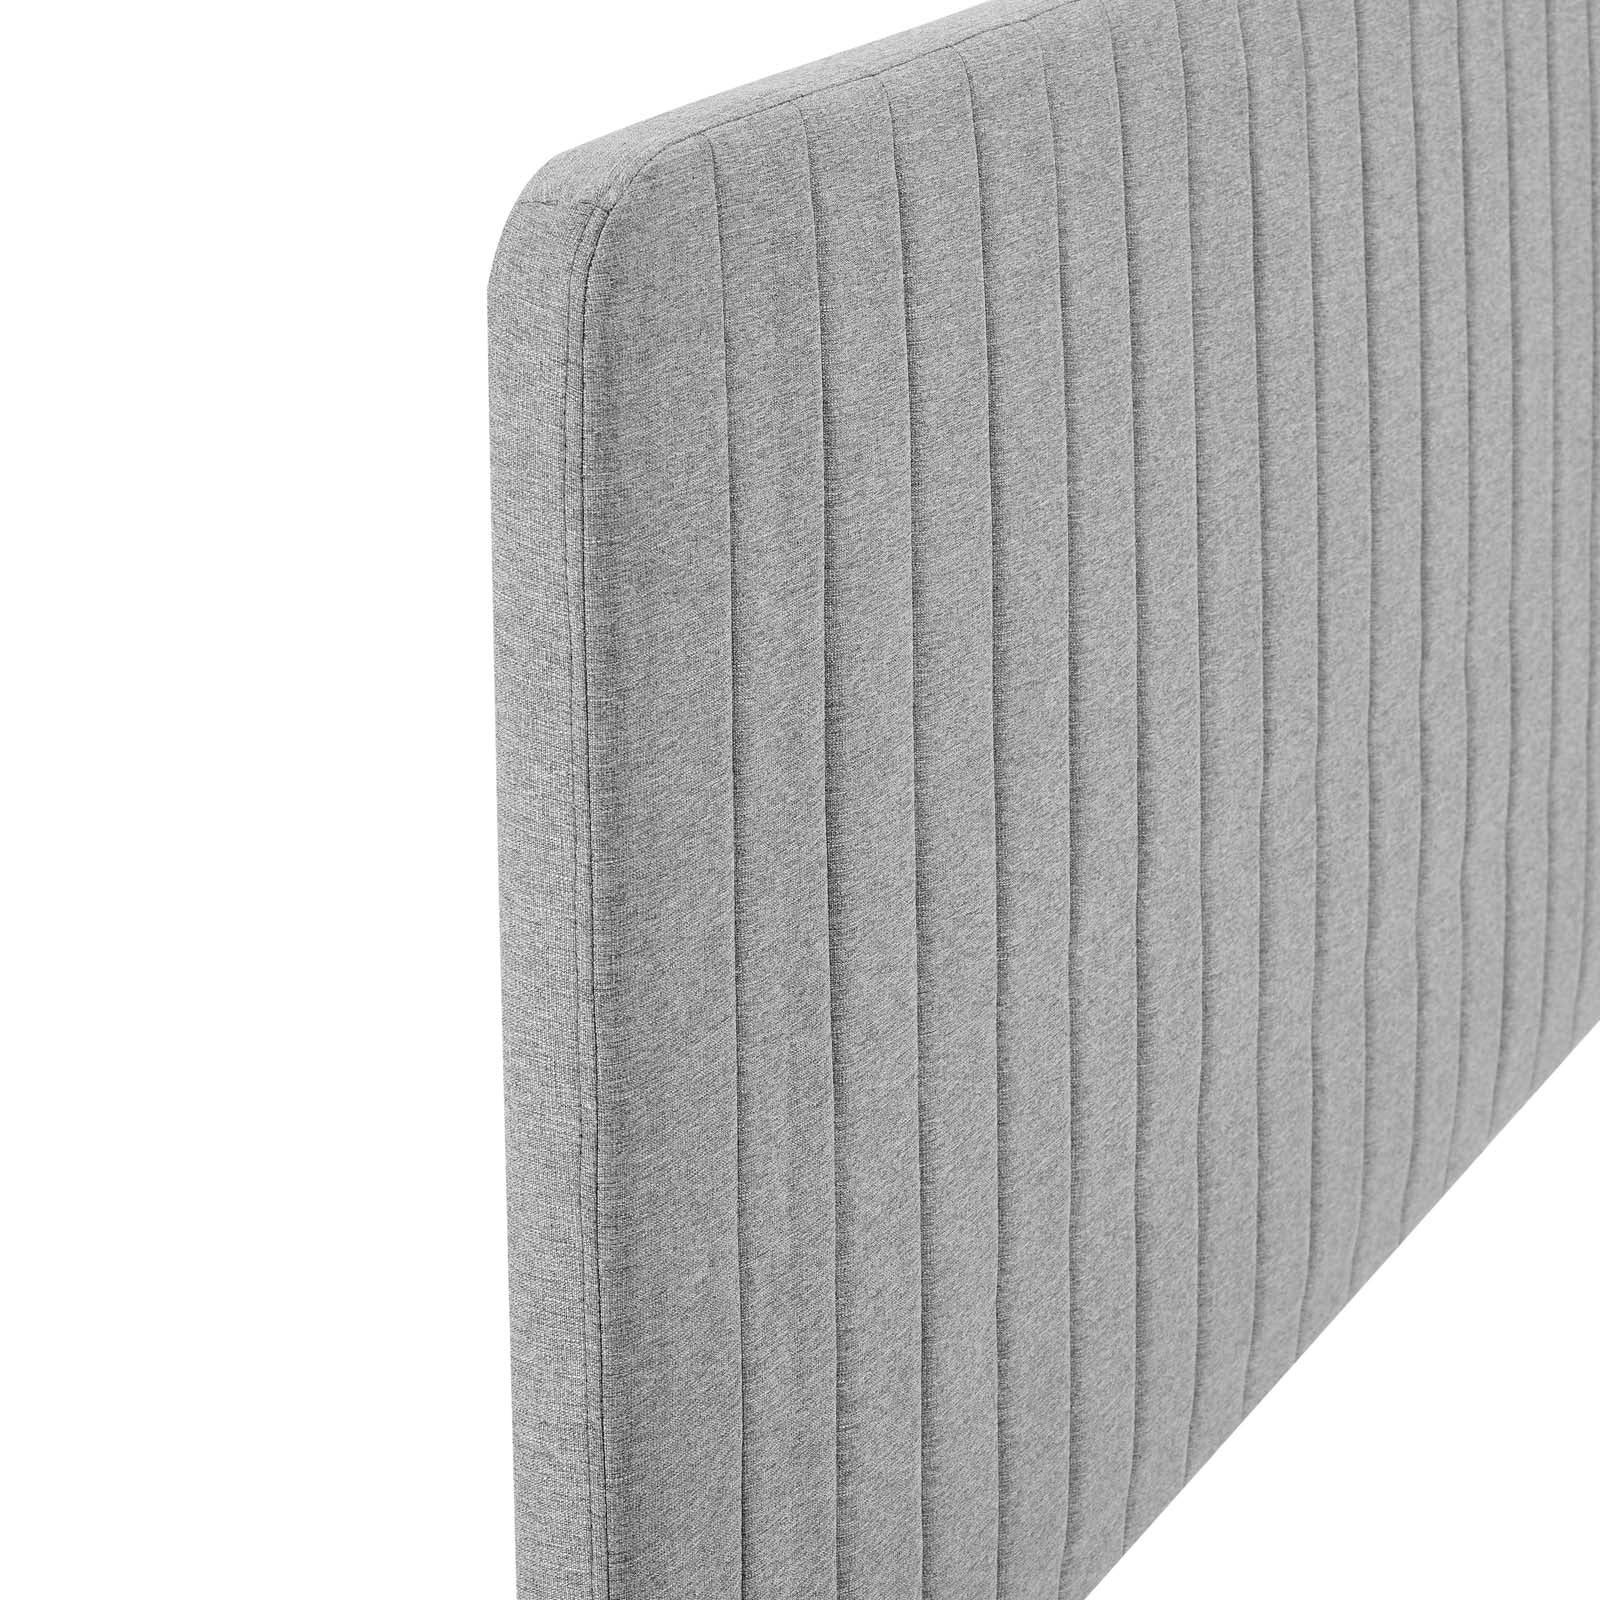 Milenna Channel Tufted Upholstered Fabric Headboard